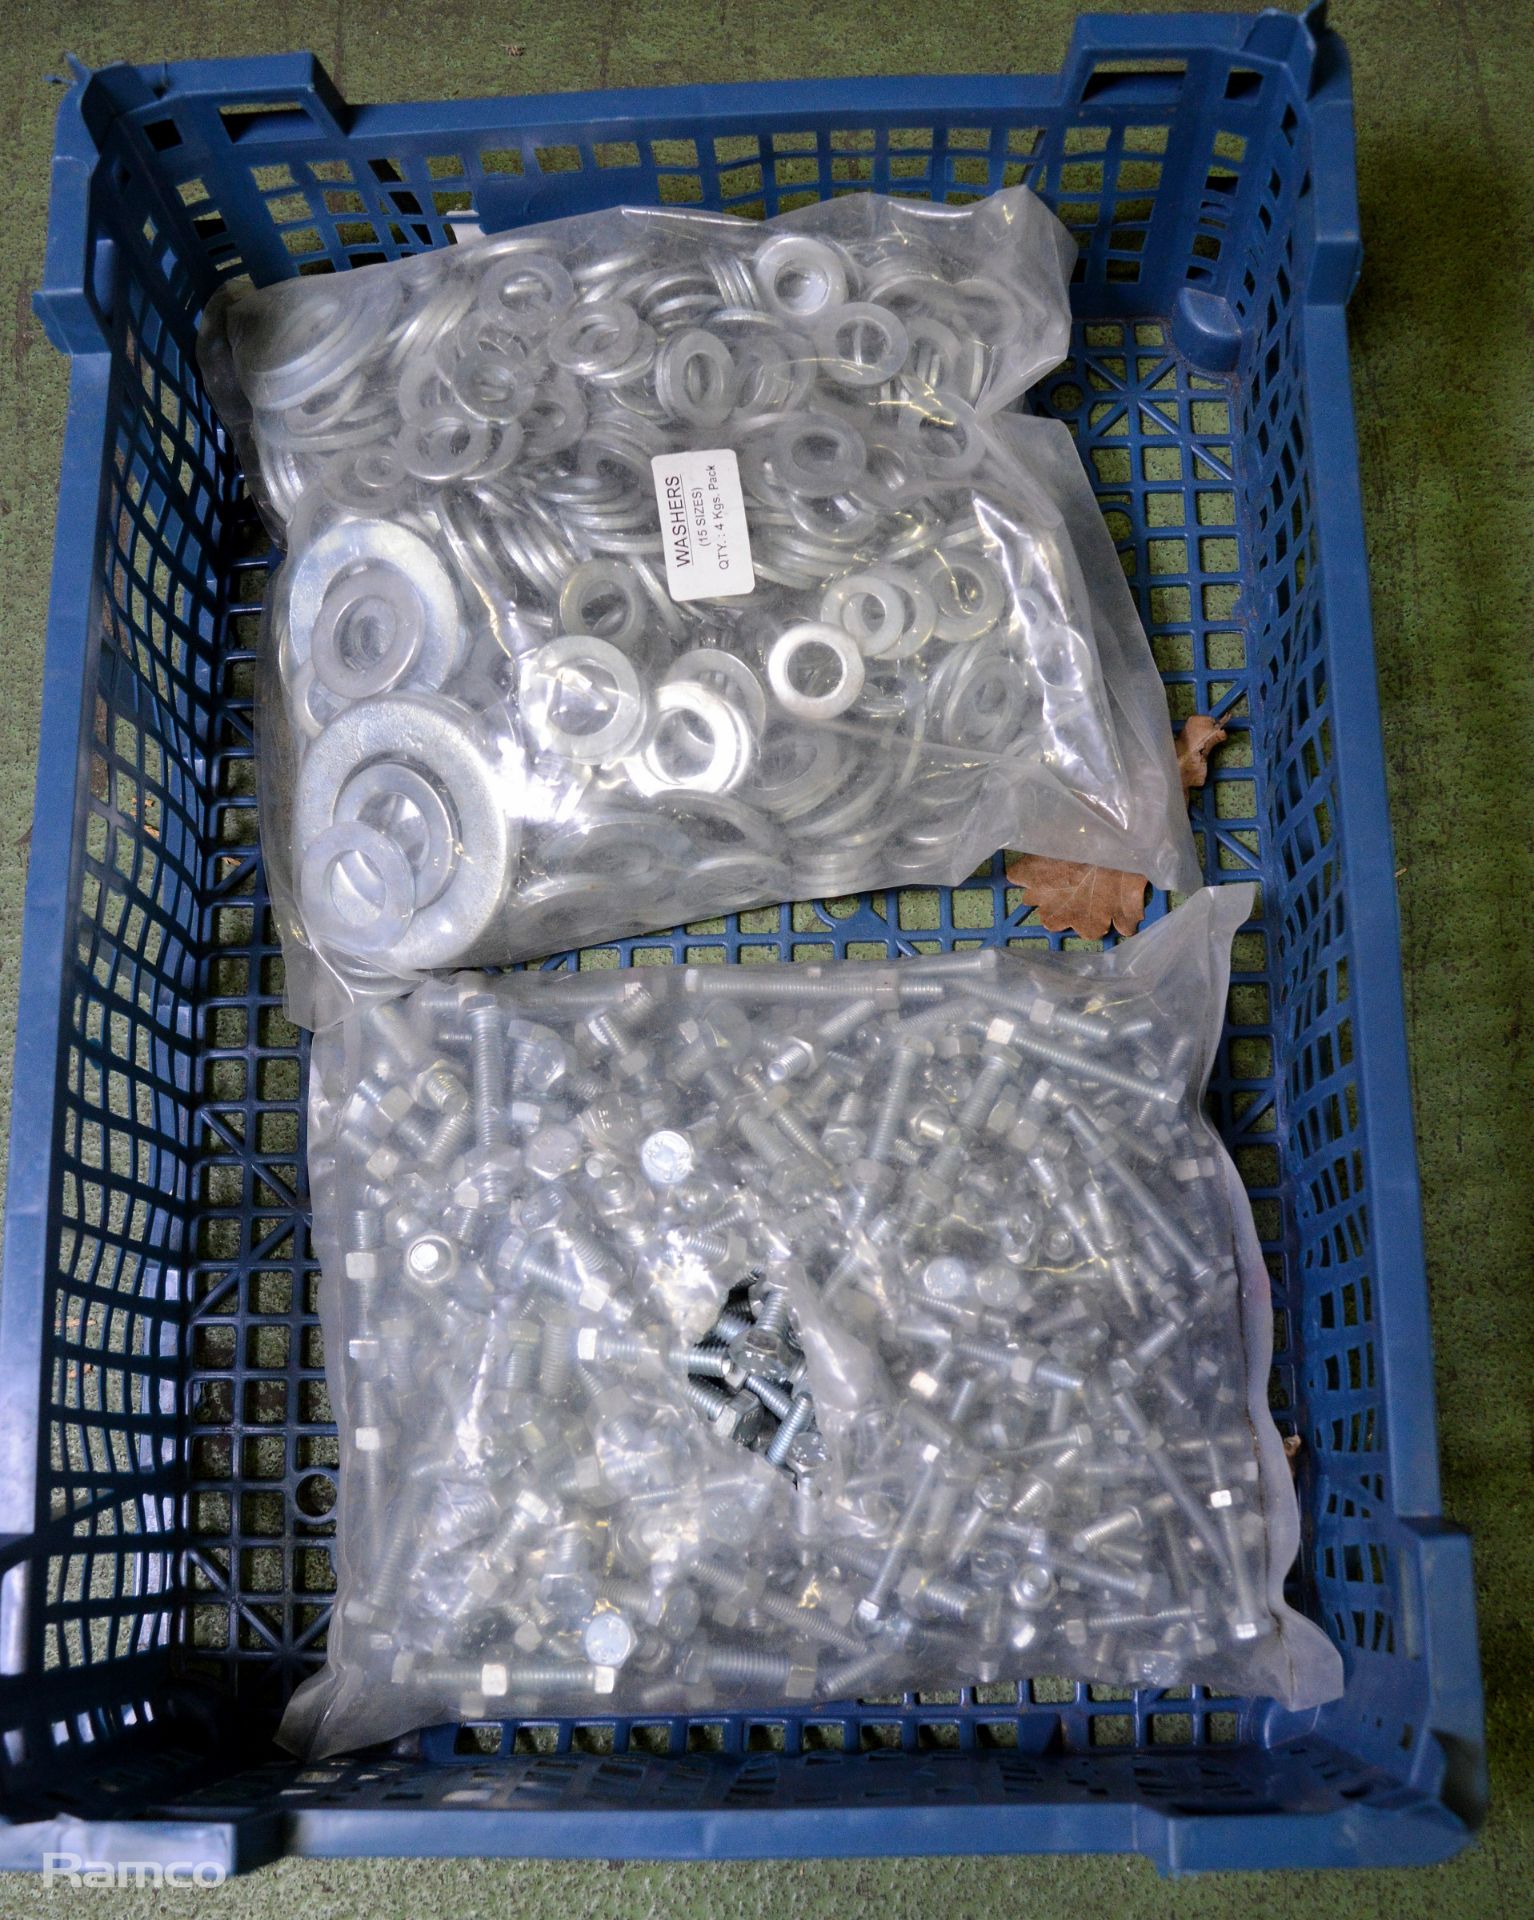 Double torch set, Chrome-vanadium sockets - various sizes & Various sized washer / nuts & bolts - Image 6 of 9